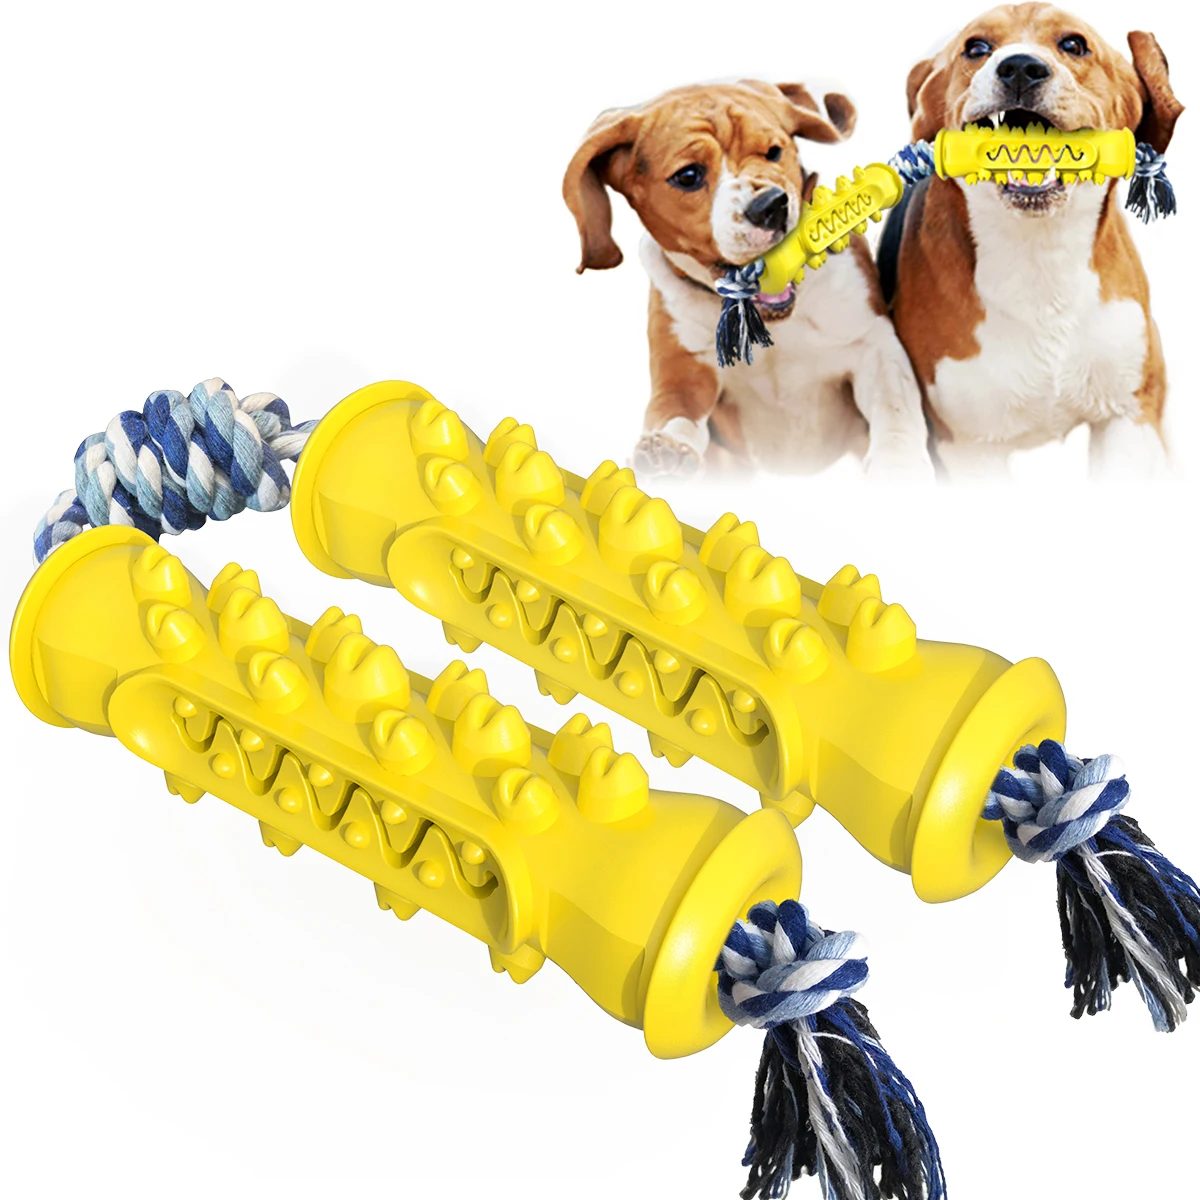 Rubber Dog Toys Puppy Teething Toy Pet Toy Ball with Cotton Rope & Rubber for Puppies and Small Dogs Cleaning Teeth Training Vaburs Dog Chewing Toys 